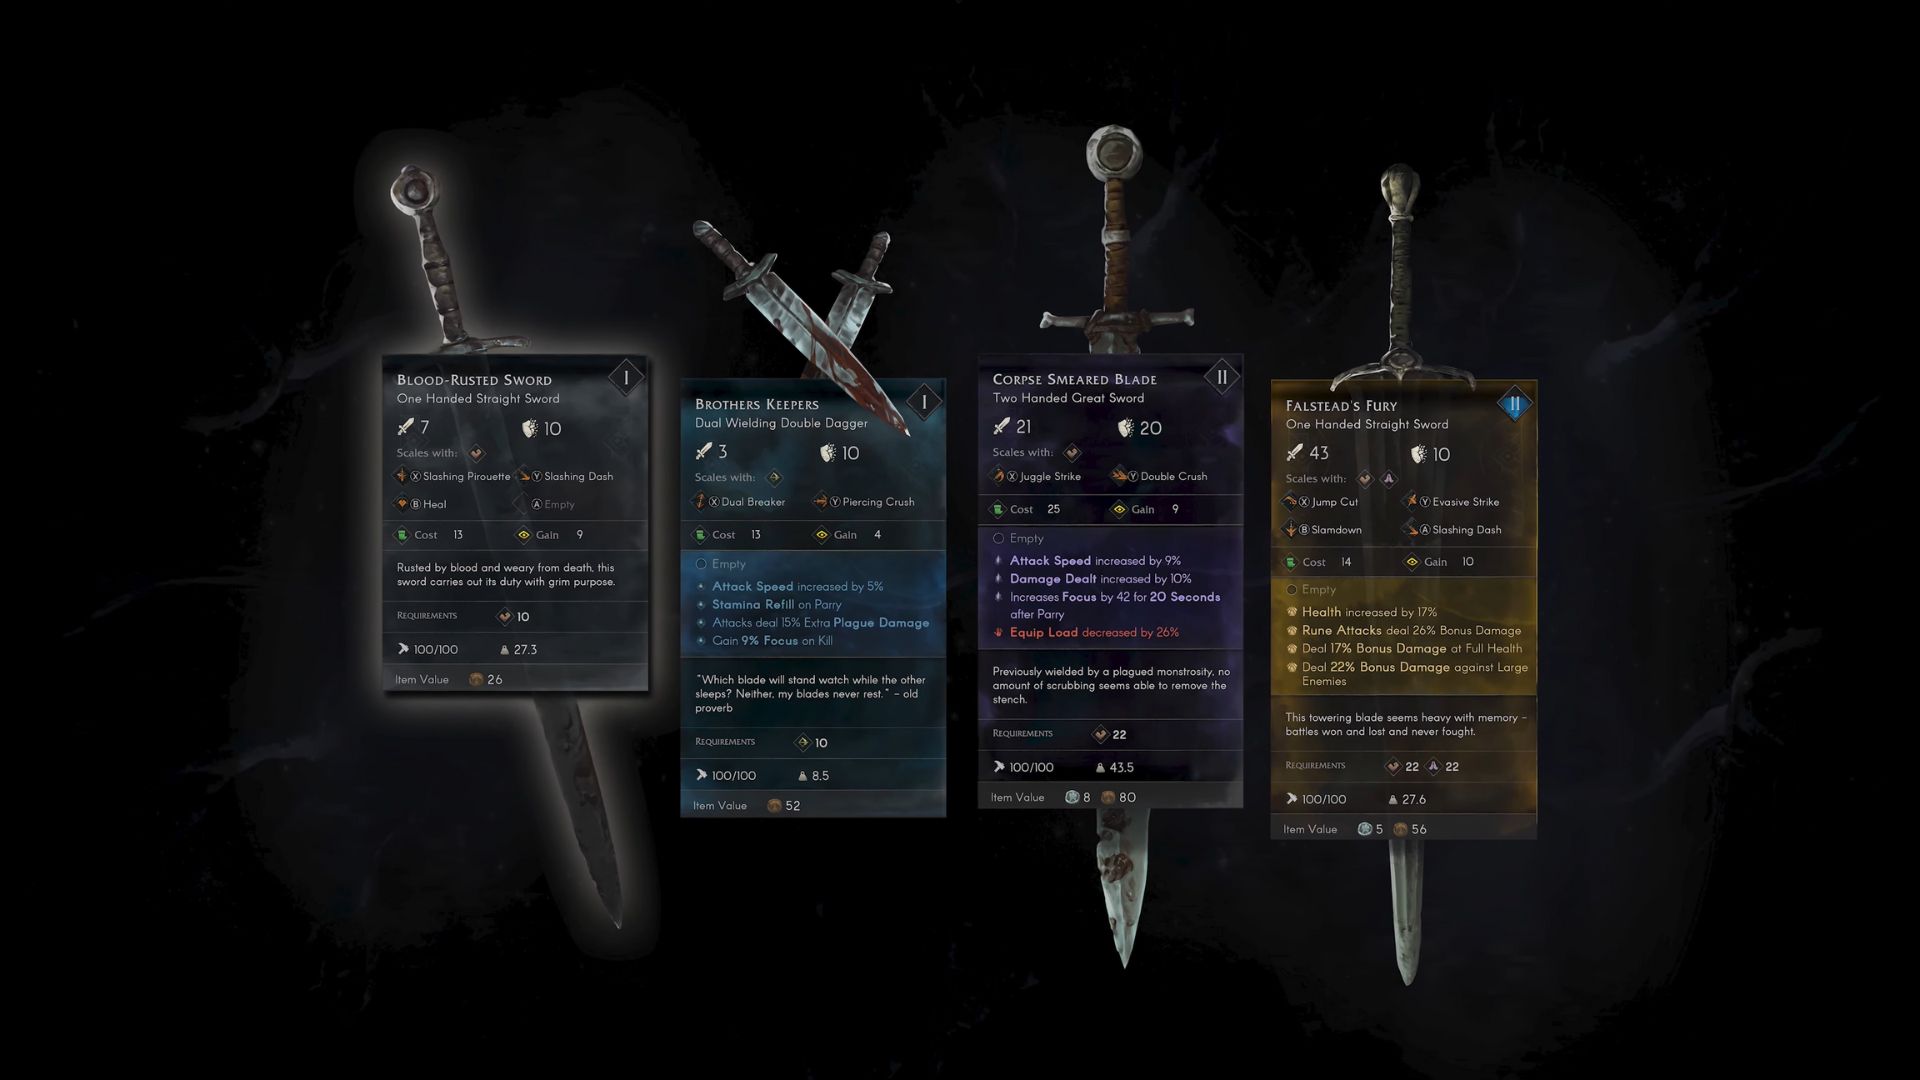 Graphic showing Common, Rare, Cursed, Unique Weapon Rarities in No Rest for the Wicked